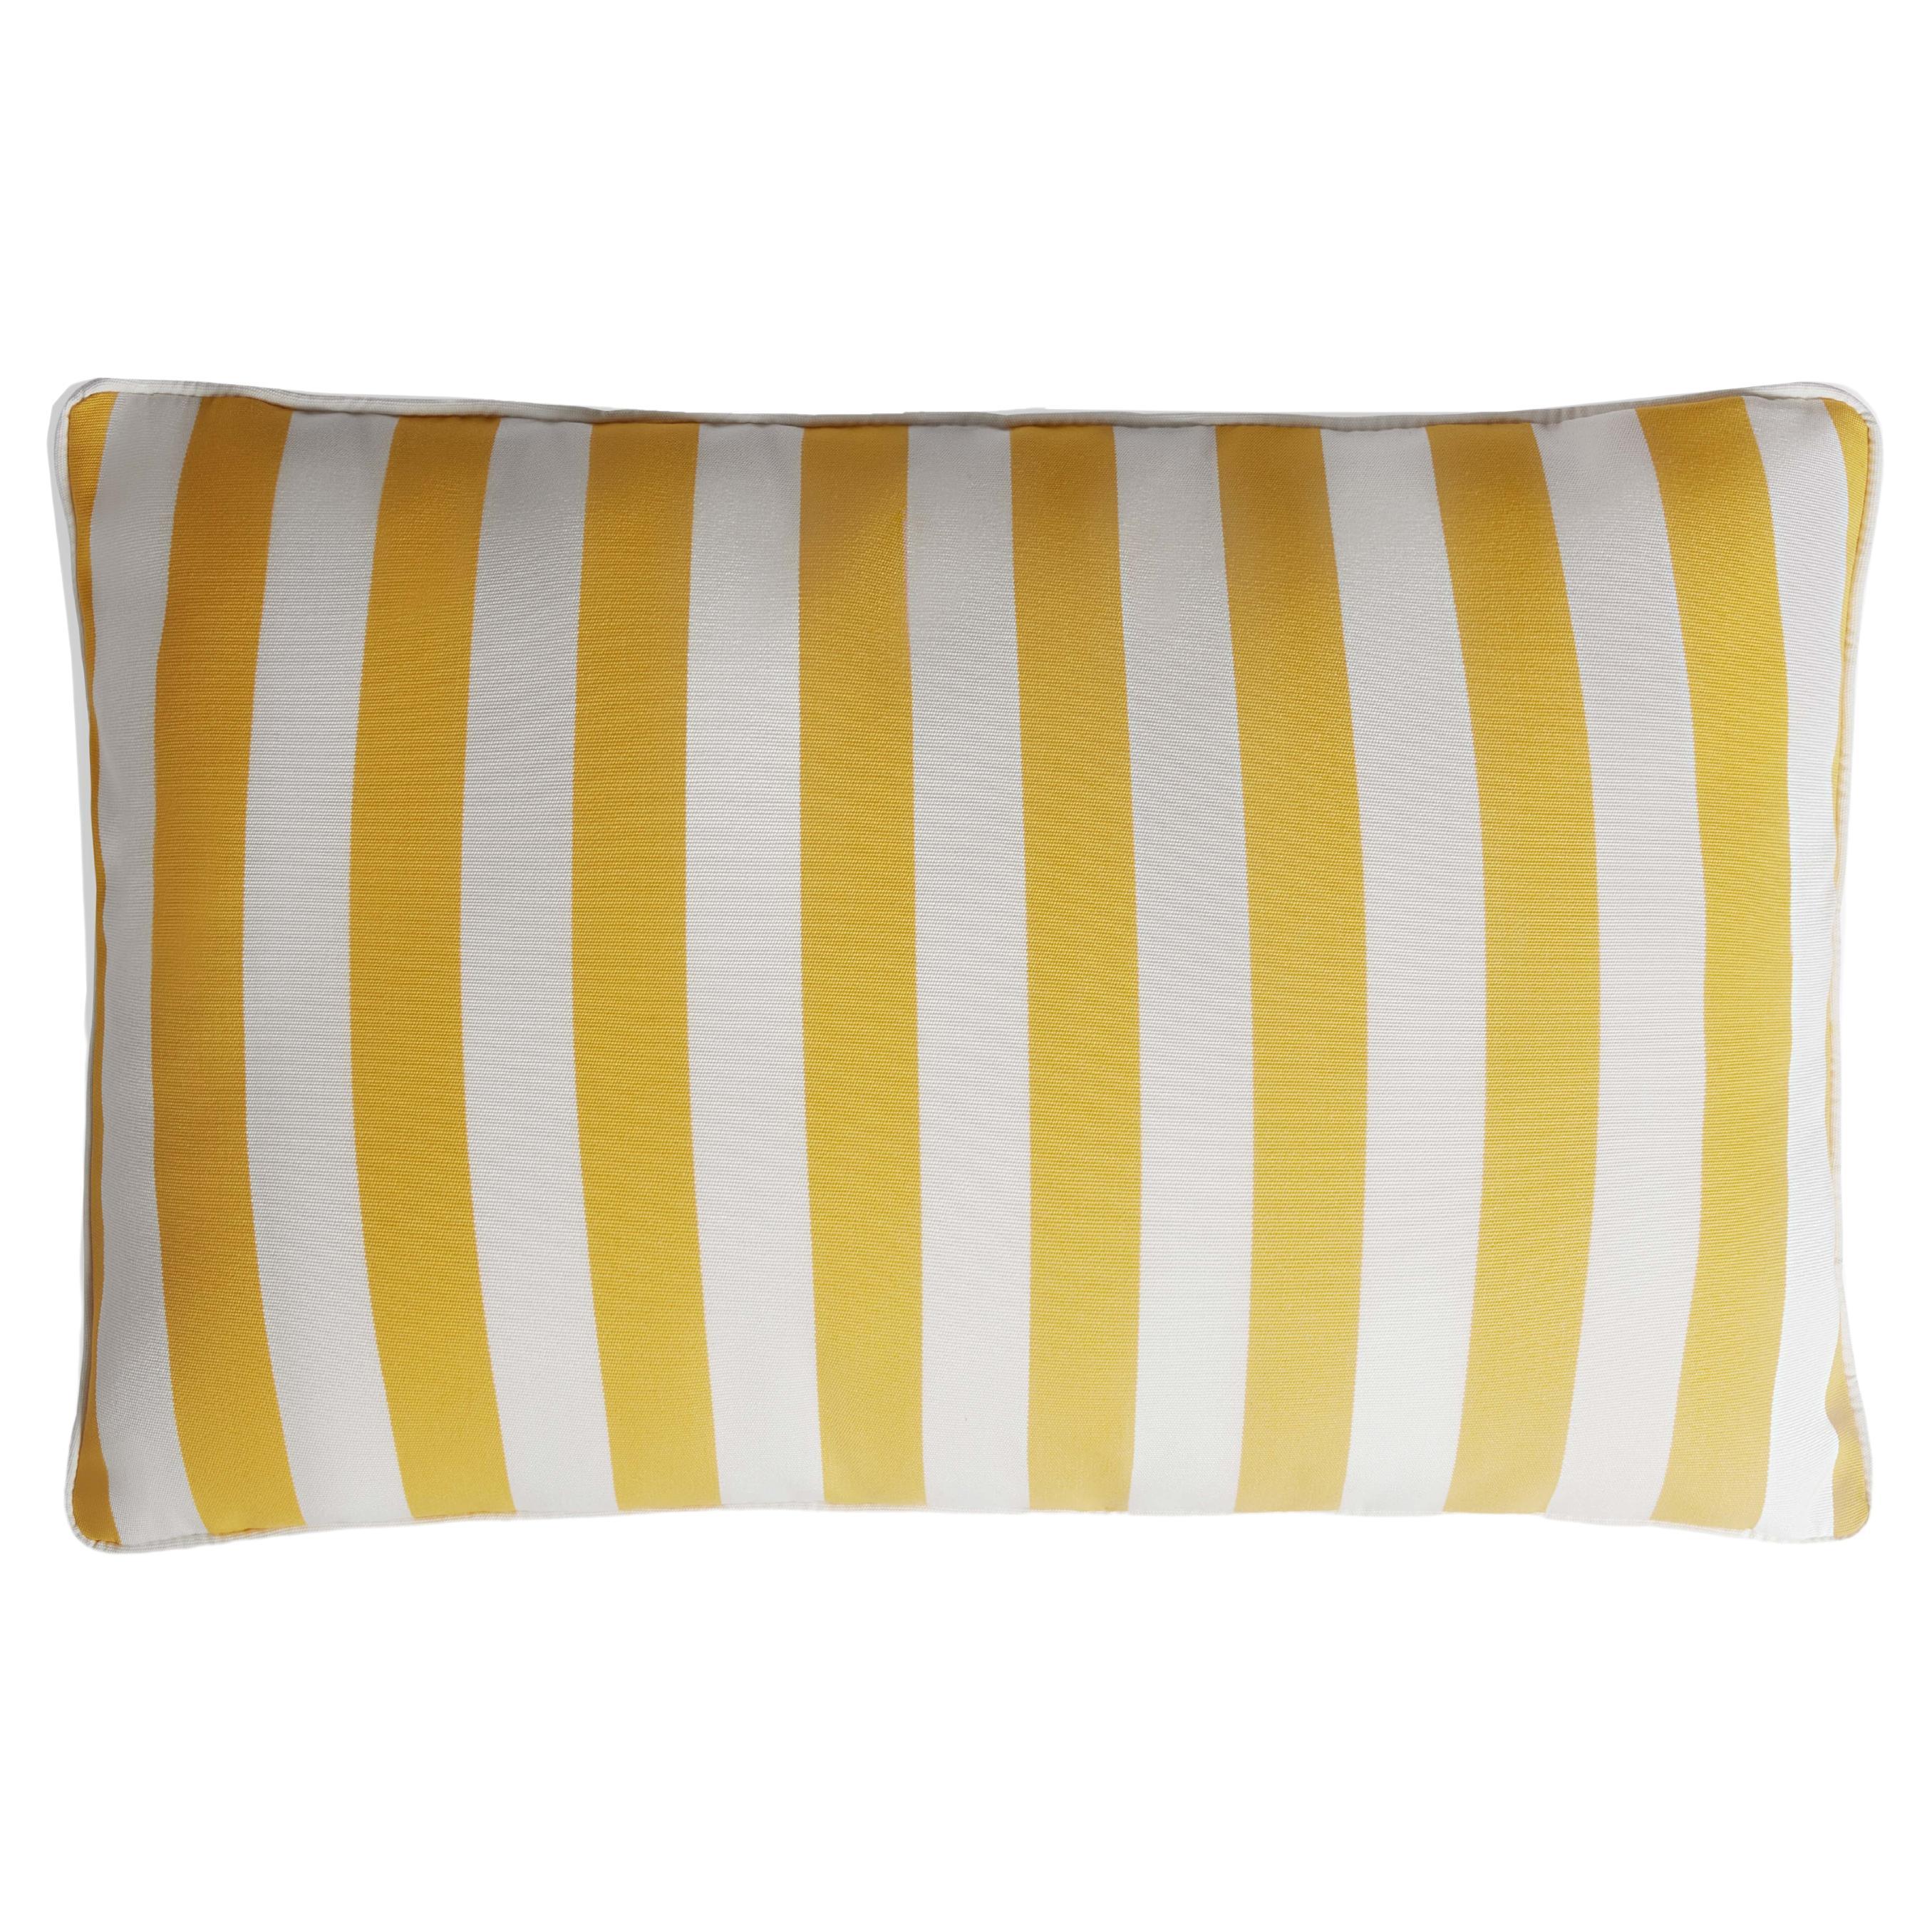 Striped Happy Frame Pillow Outdoor with Piping Yellow and White Water Repellent